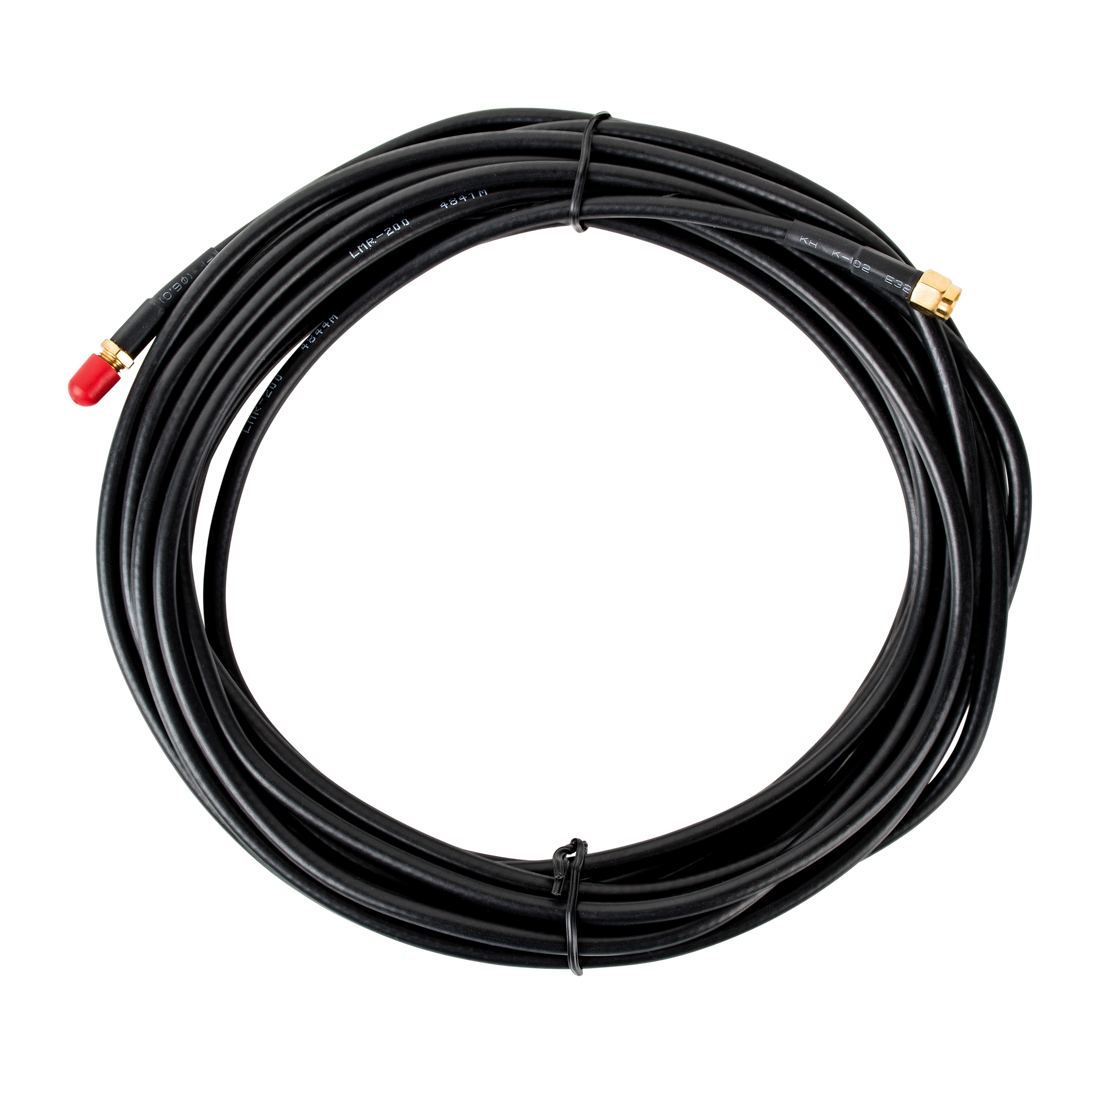 Antenna extension cable with reliable signal transmission for pool autofill system